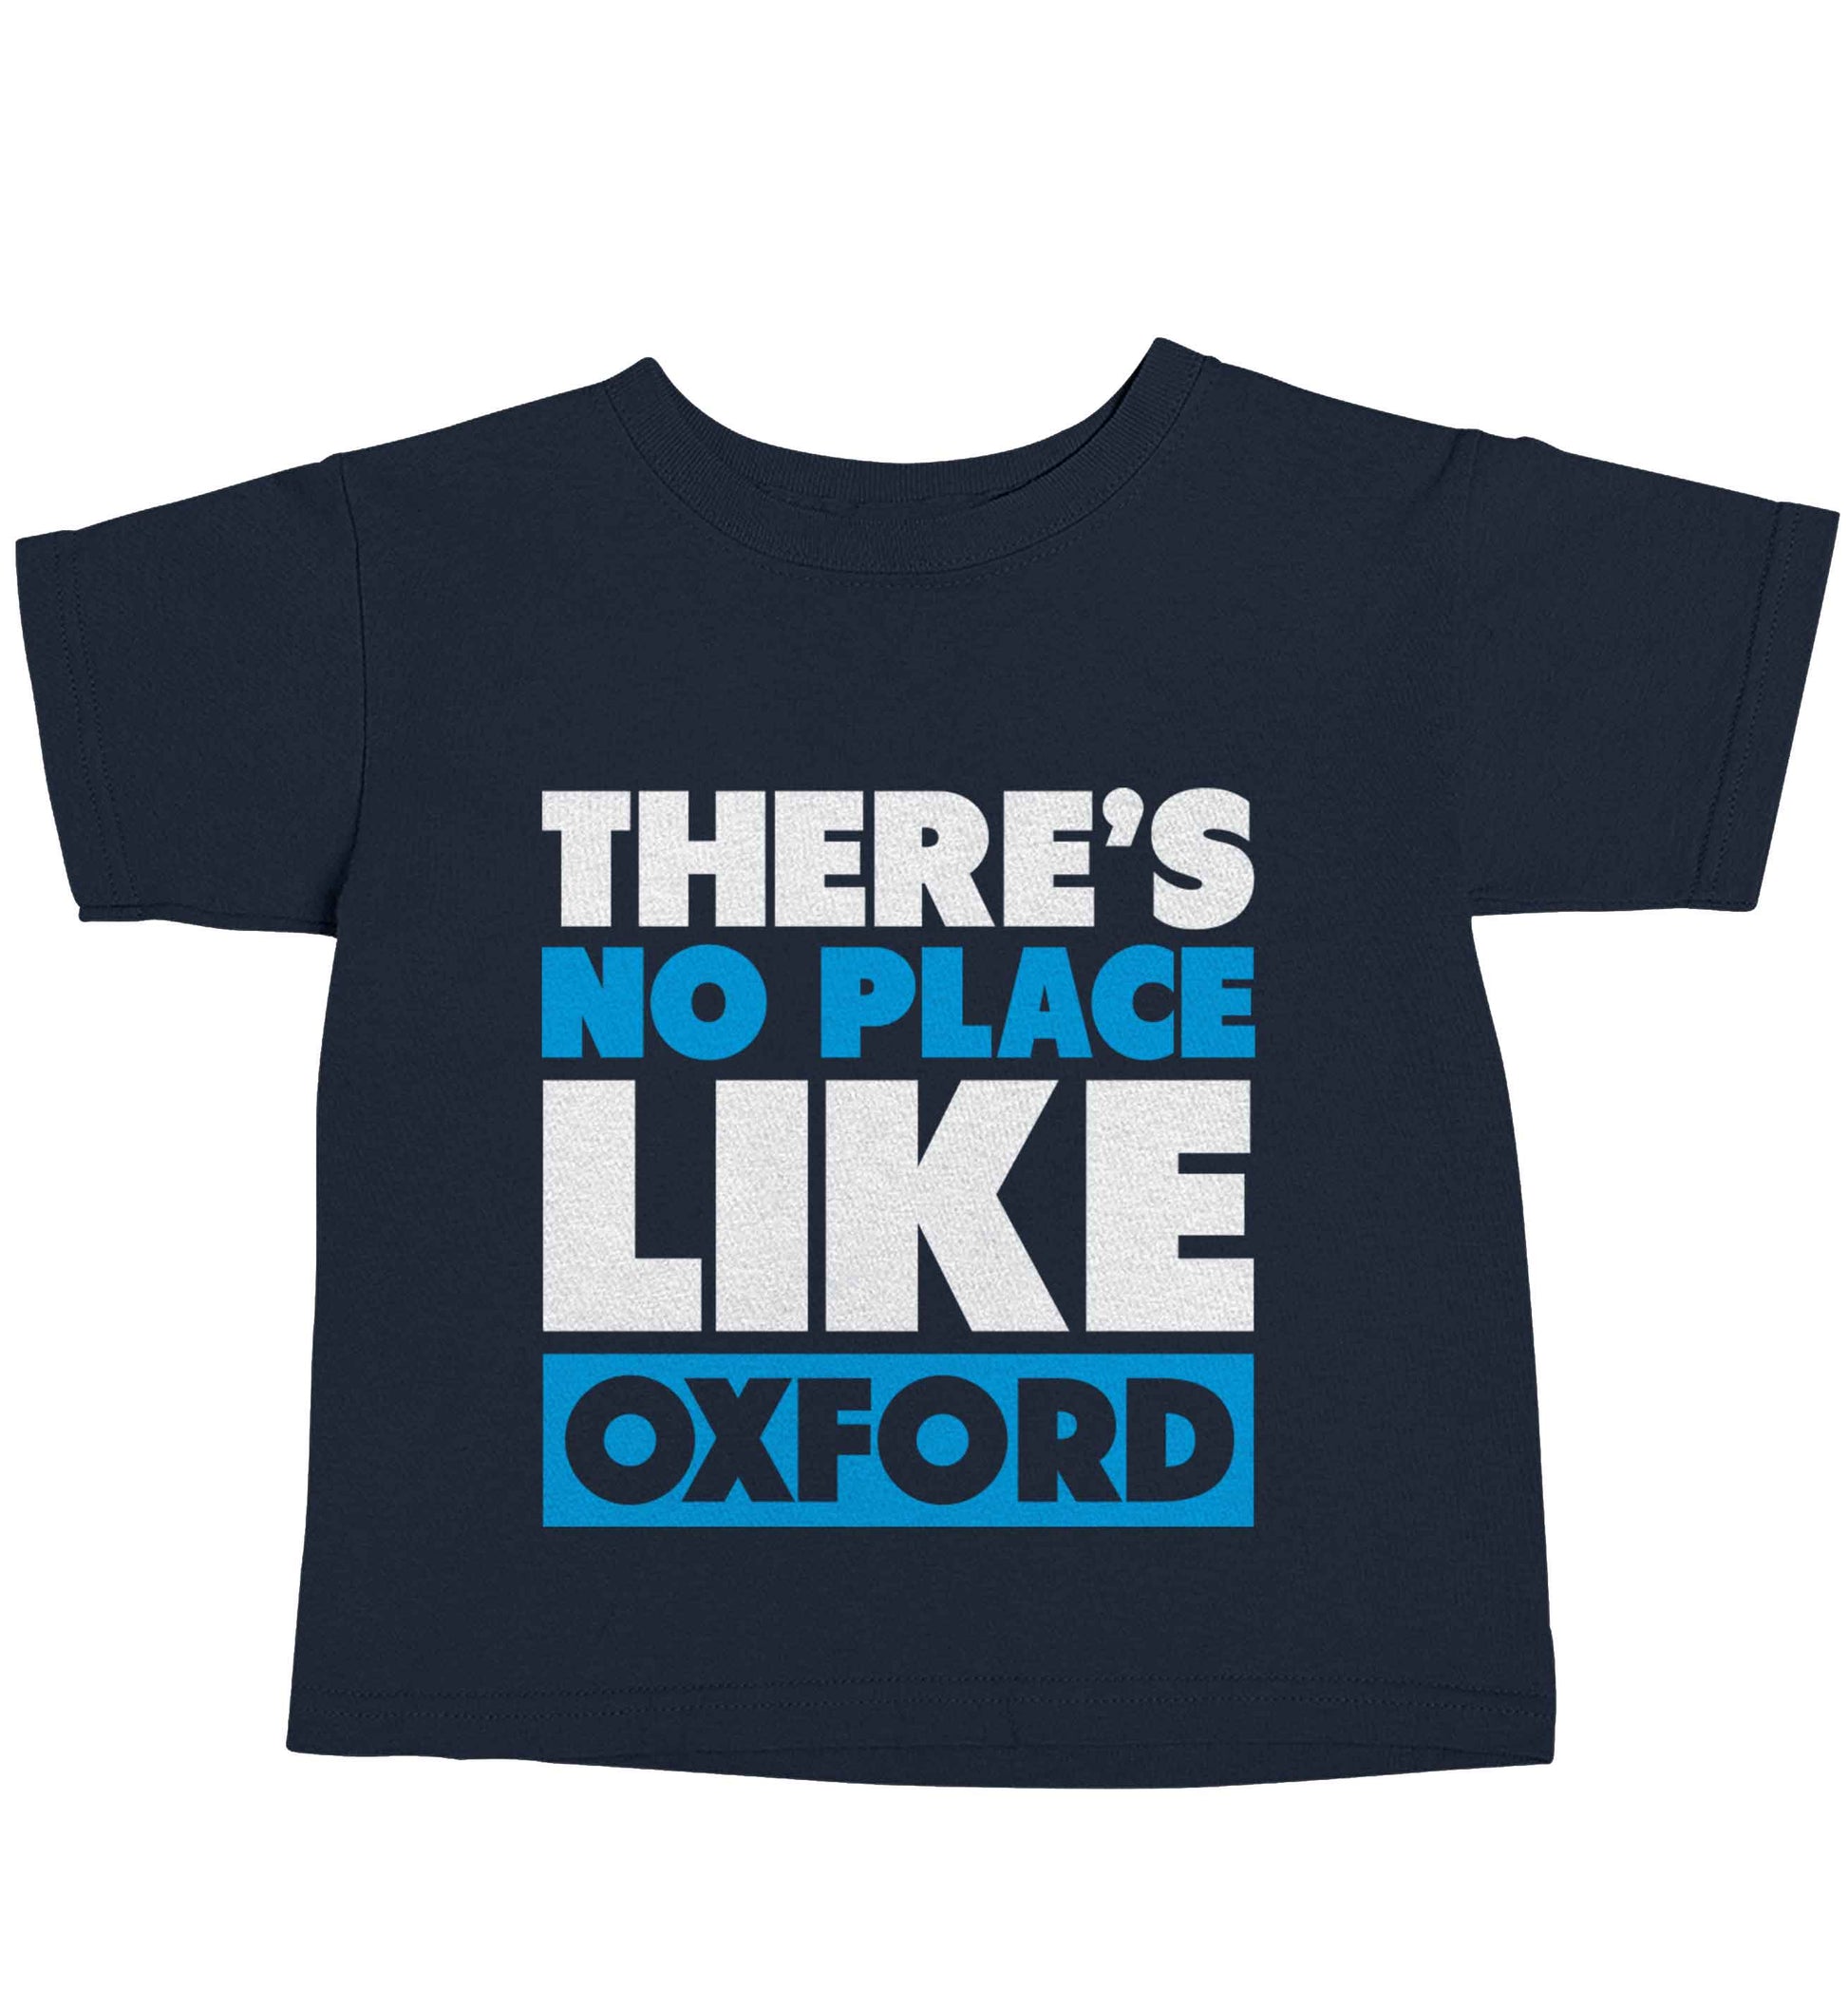 There's no place like Oxford navy baby toddler Tshirt 2 Years